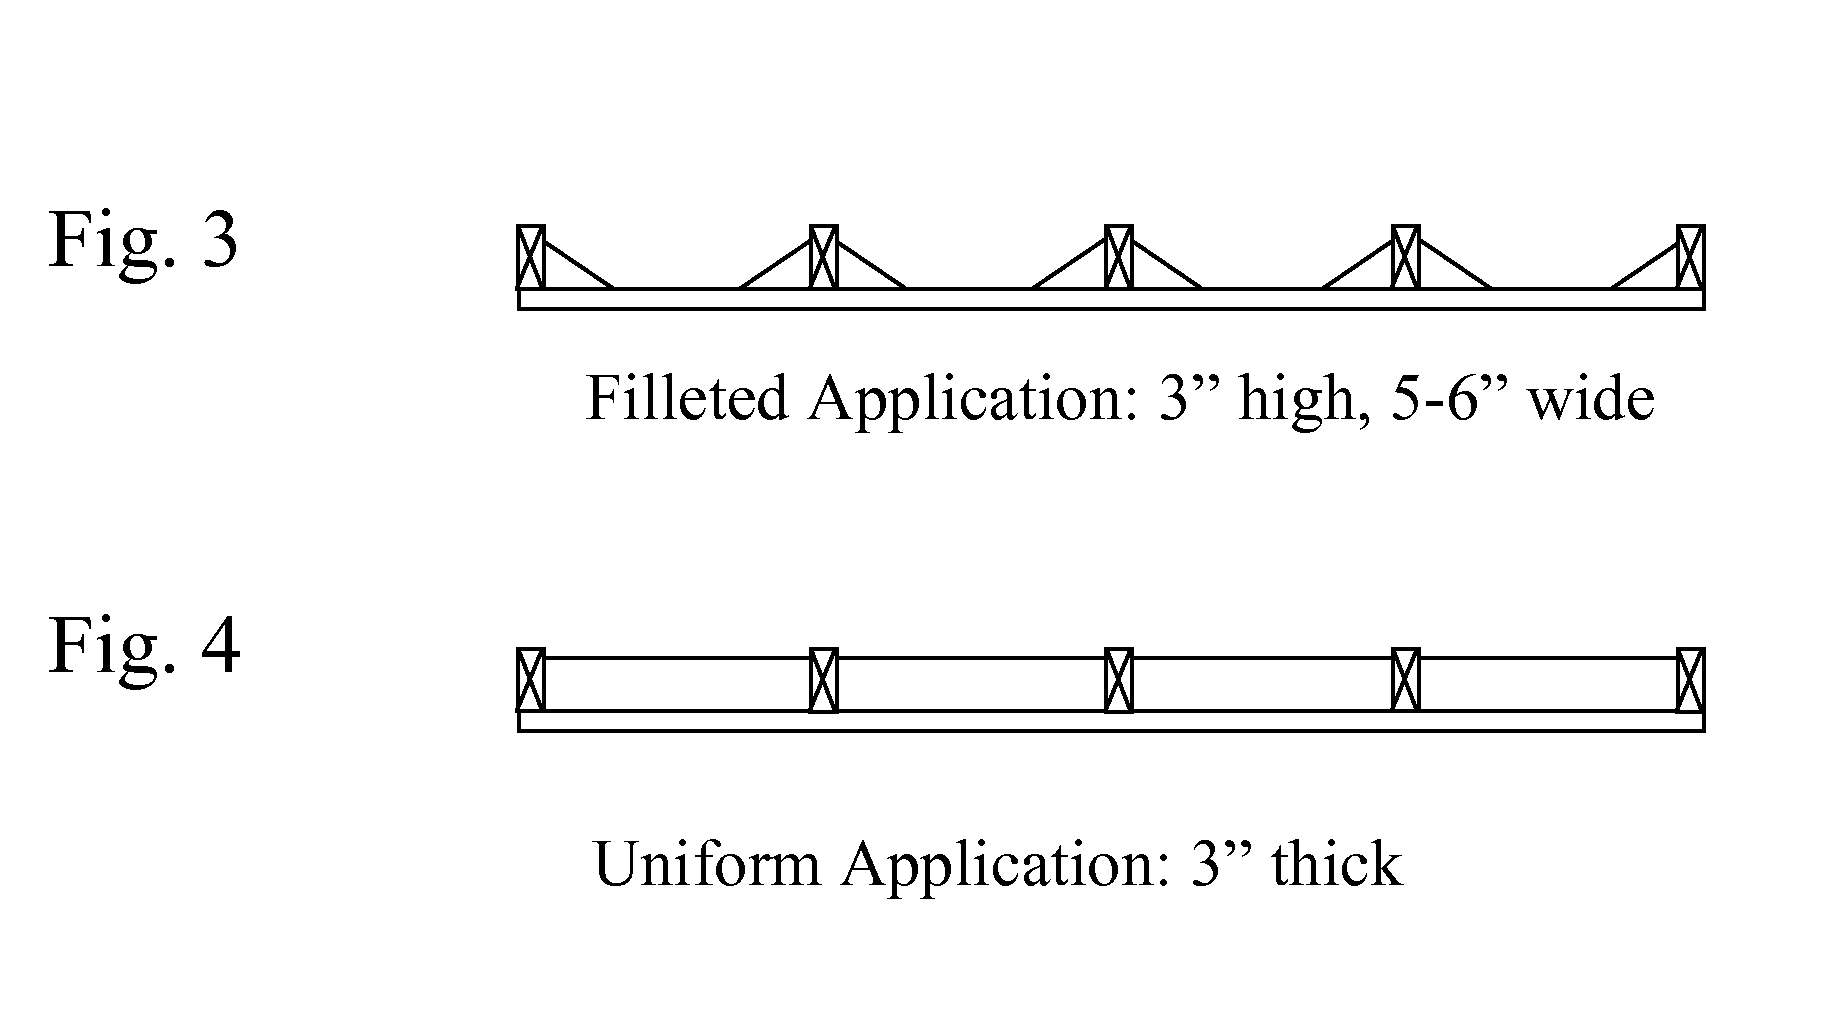 Method for increasing wind uplift resistance of wood-framed roofs using closed-cell spray polyurethane foam